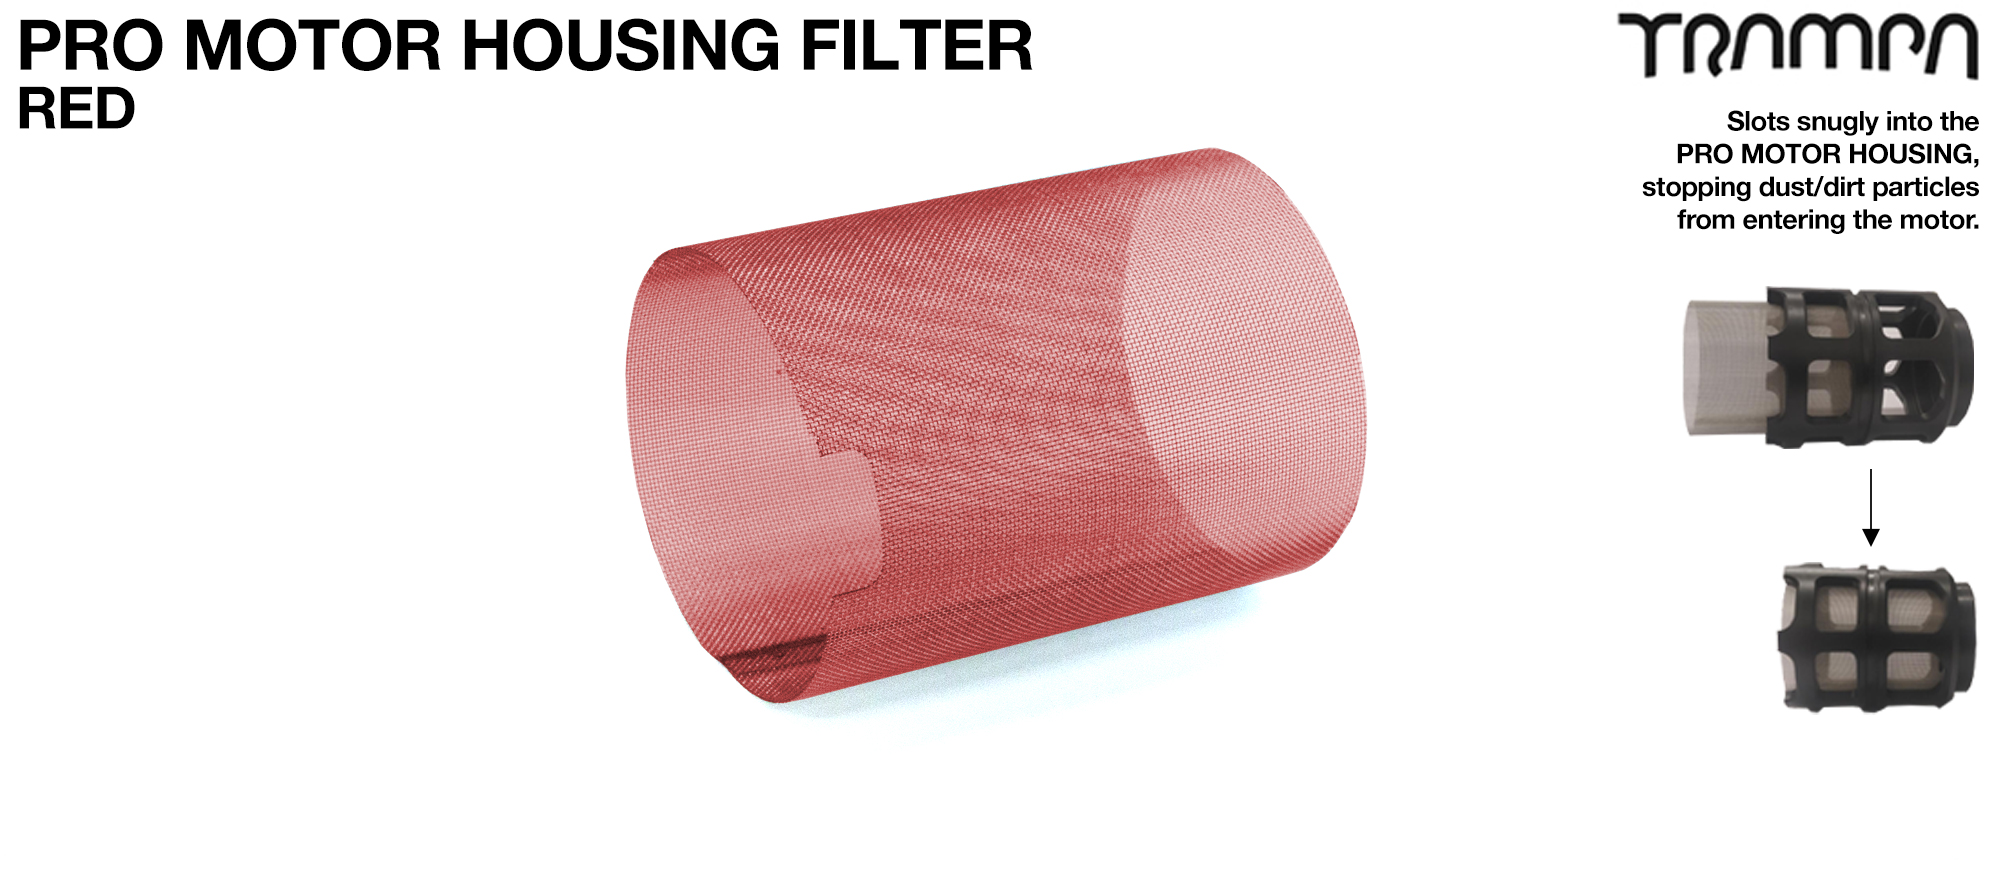 MkII FULL Motor Protection Cover & MESH FILTER - RED